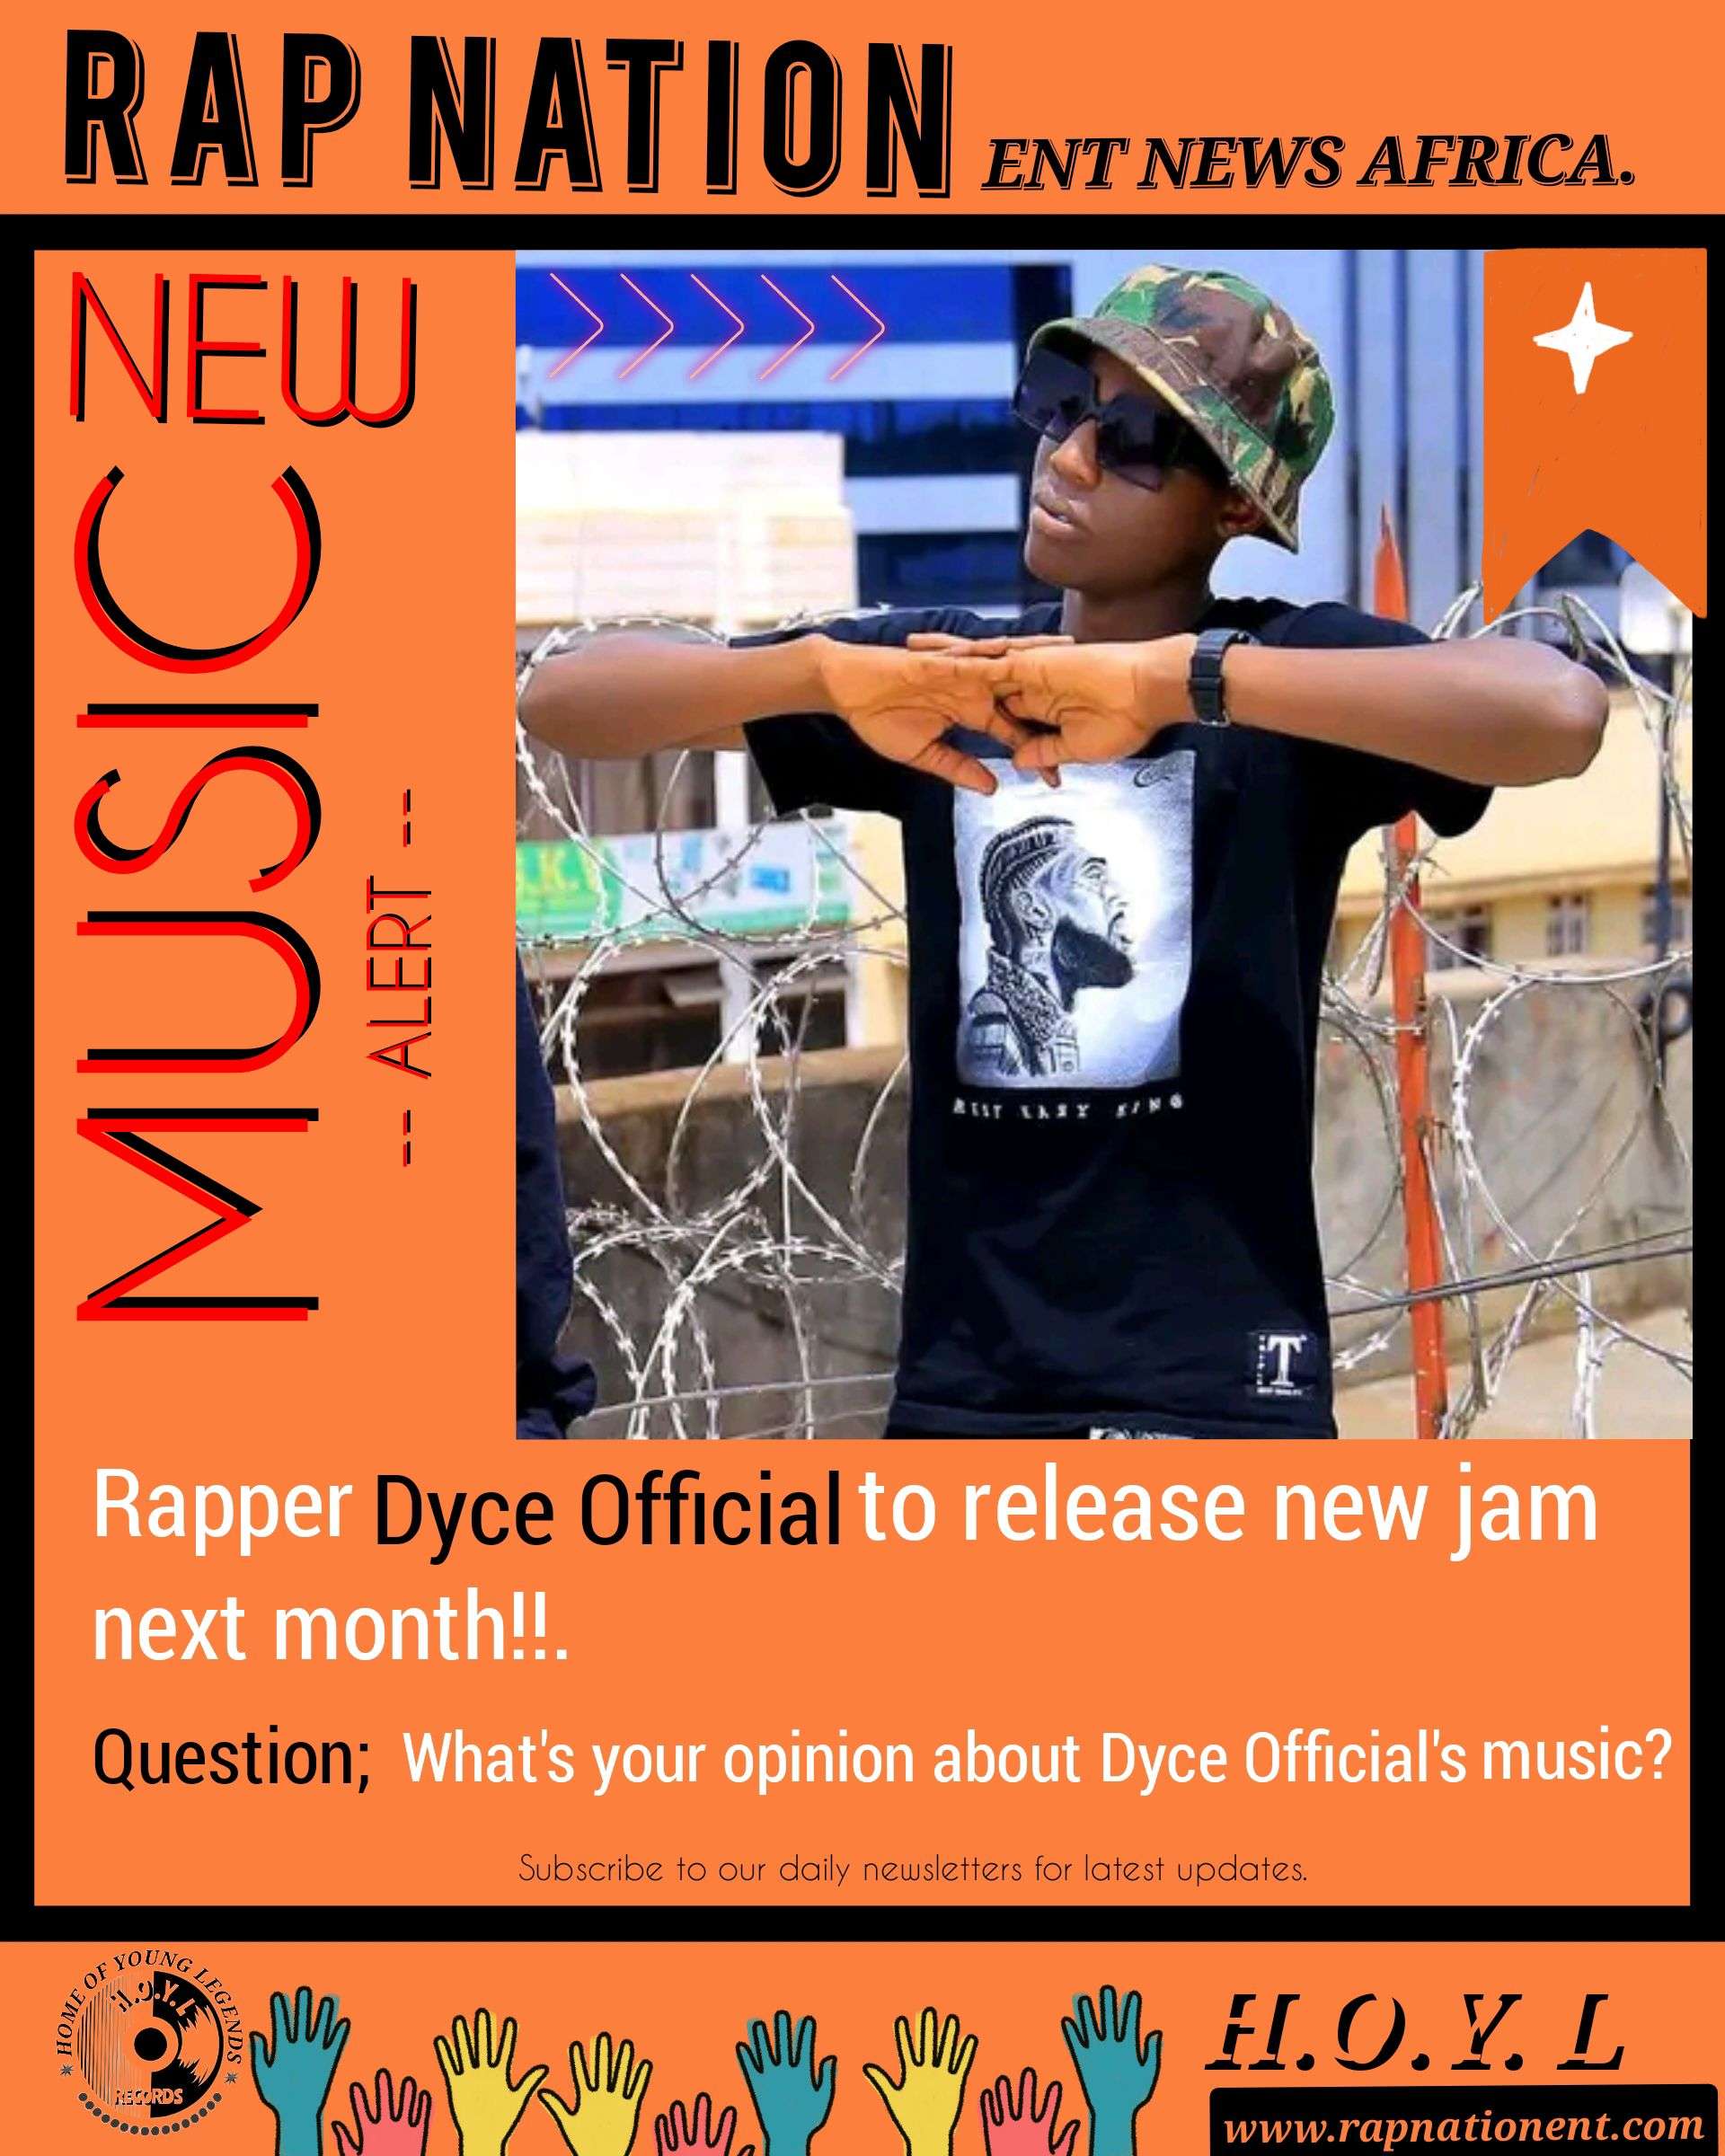 Rapper Dyce Official to release second studio album.